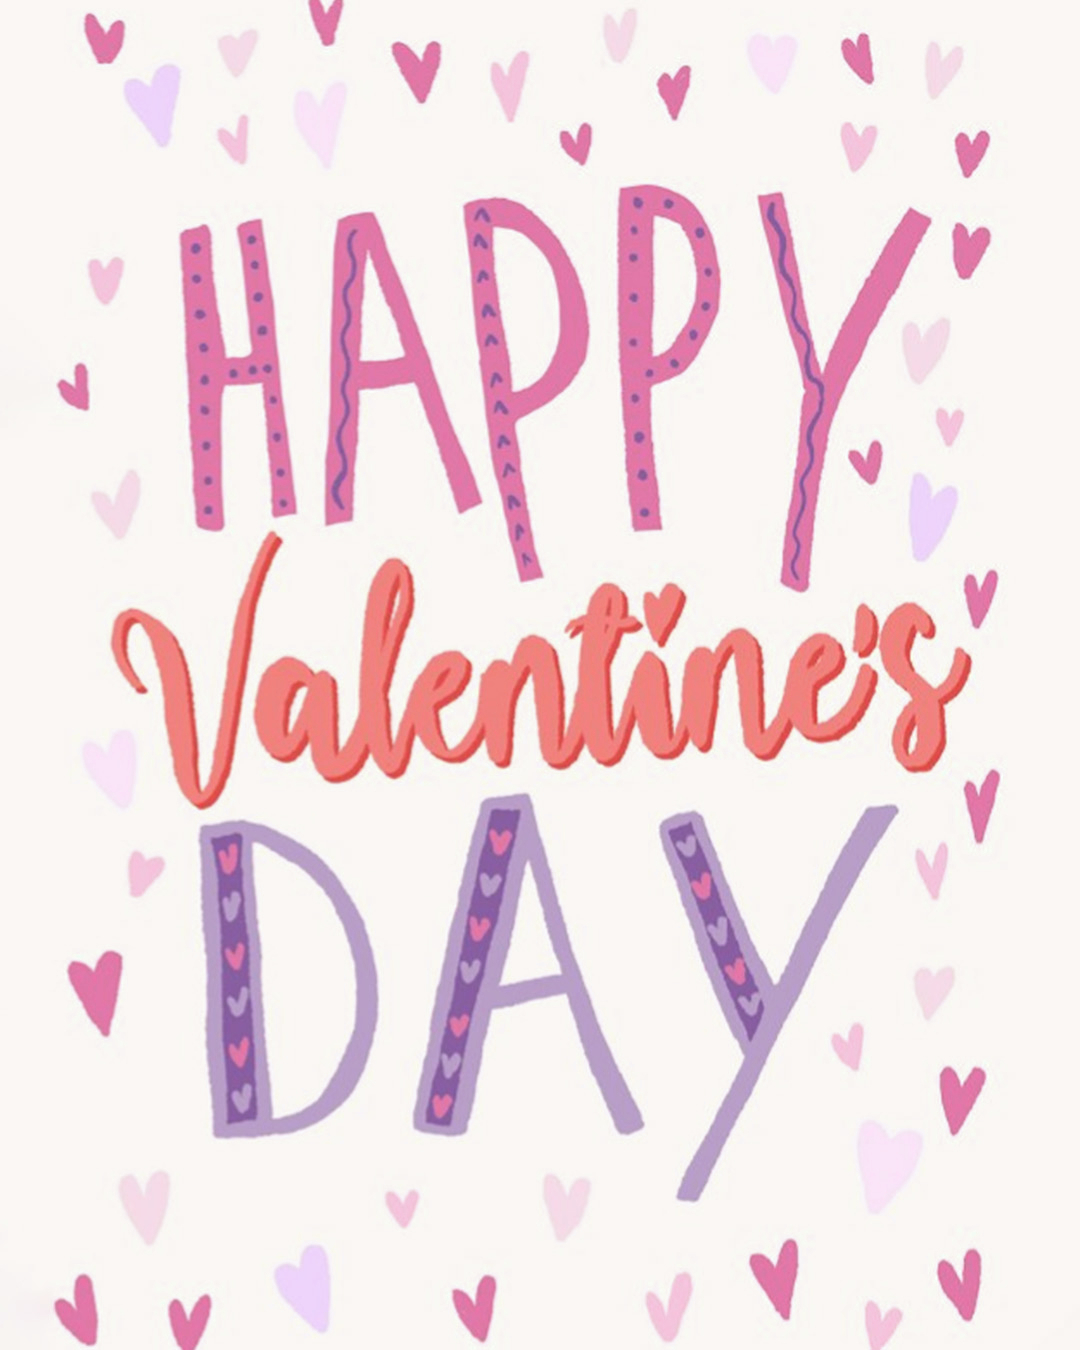 Wishing you a very happy Valentine's Day! We hope you have a lovely day celeb...